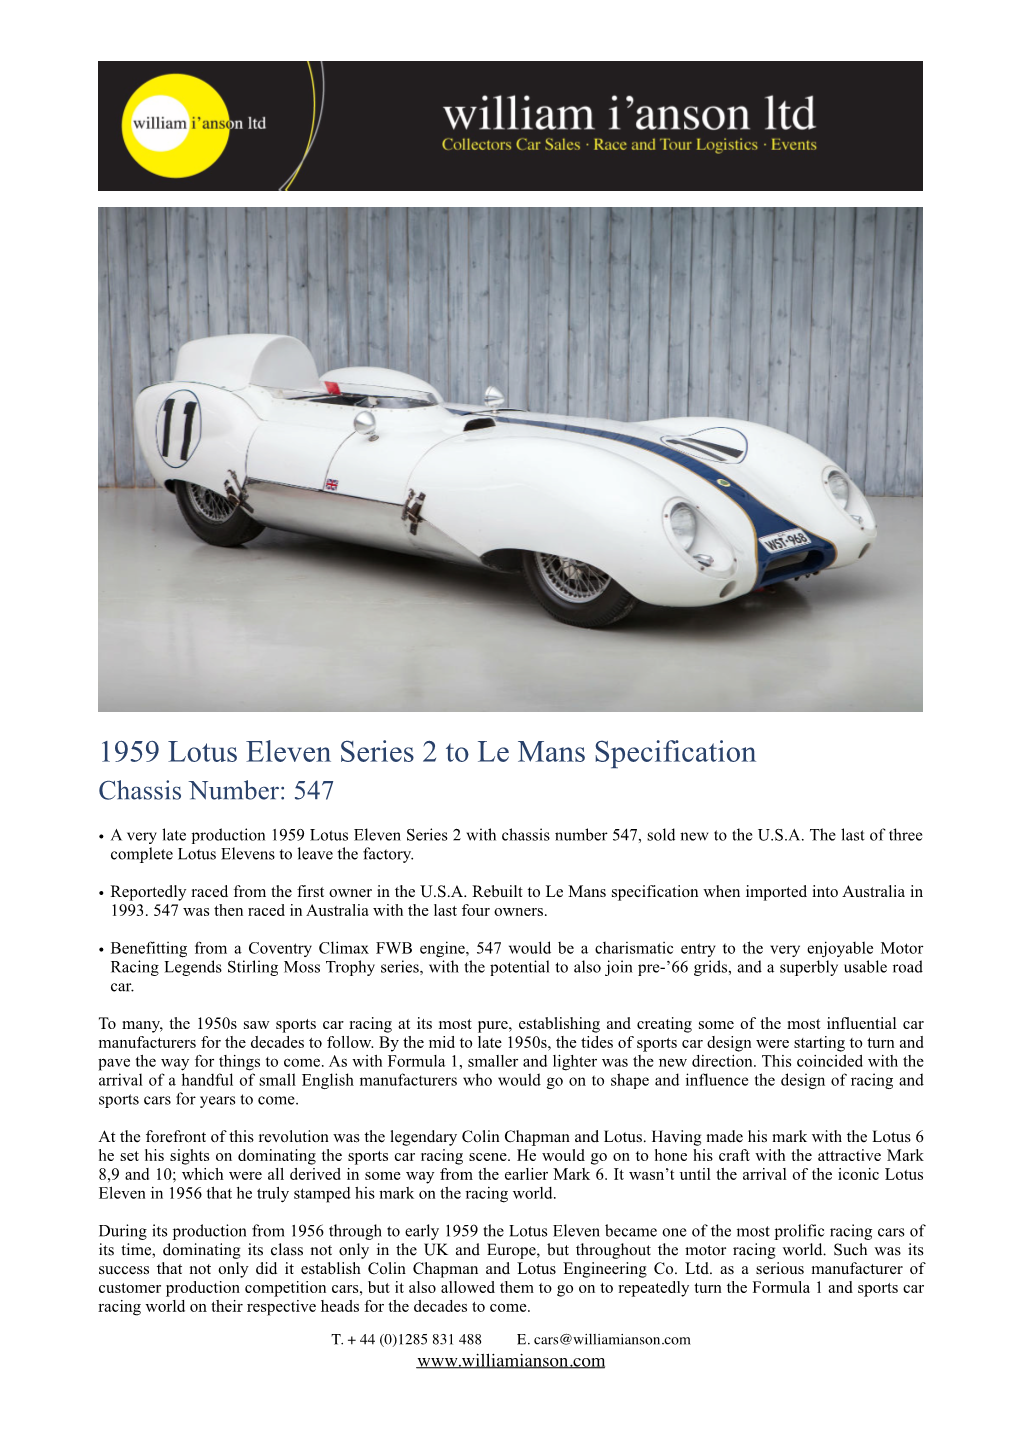 1959 Lotus Eleven Series 2 to Le Mans Specification Chassis Number: 547